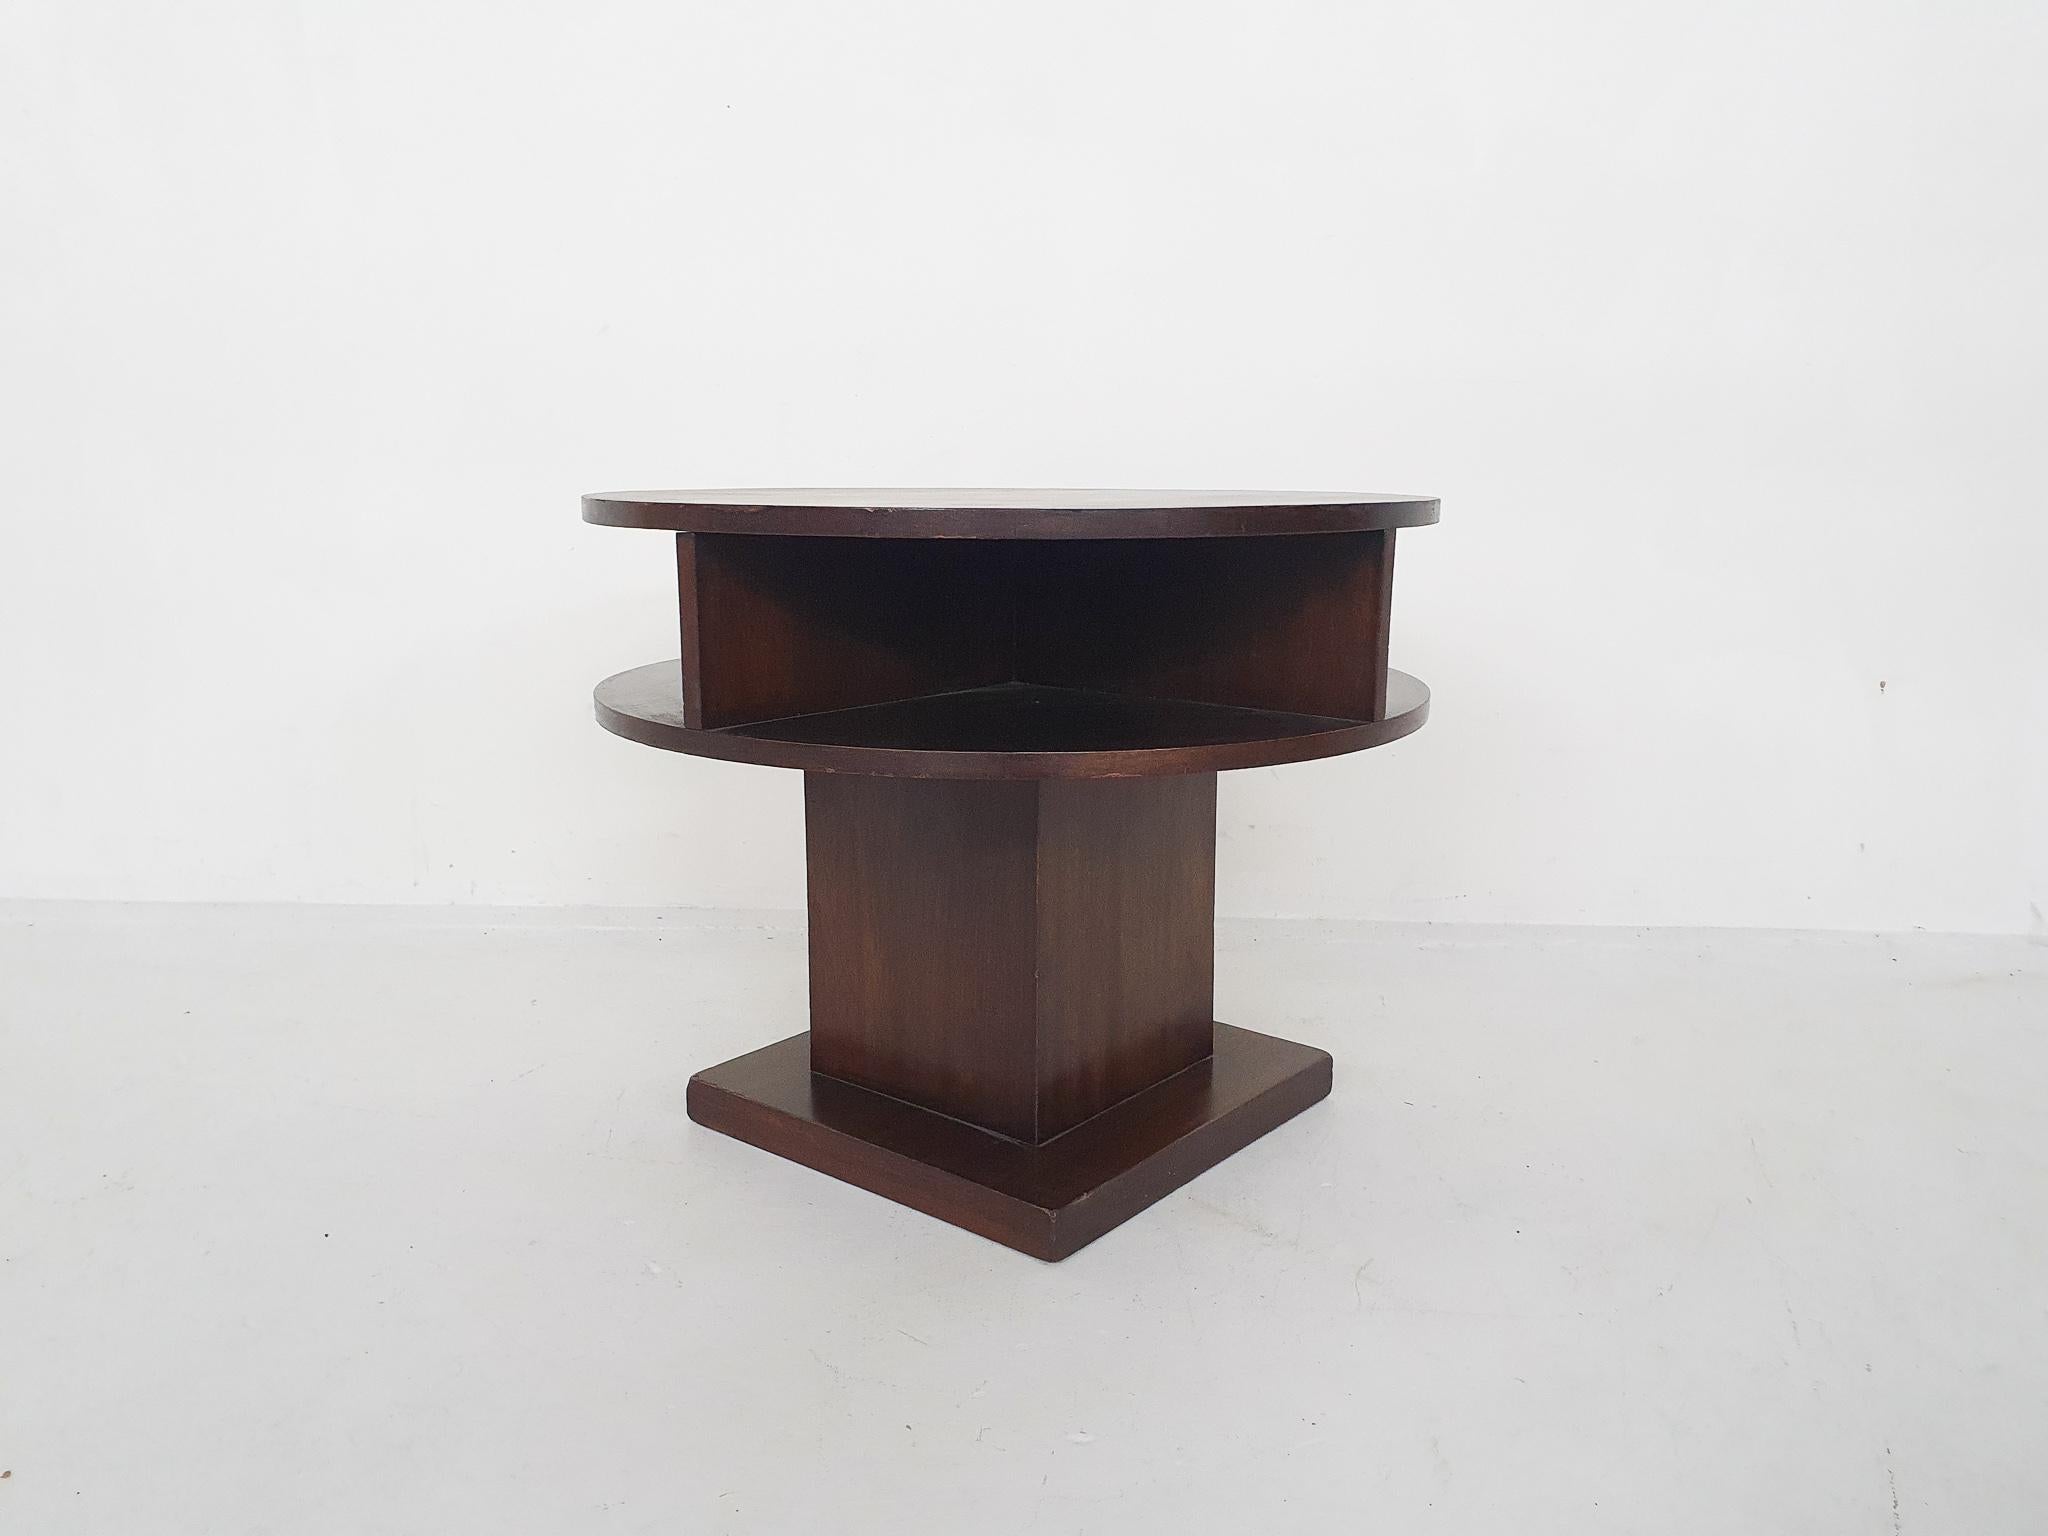 Dutch Art Deco Round Mahogany Side Table, The Netherlands 1930's For Sale